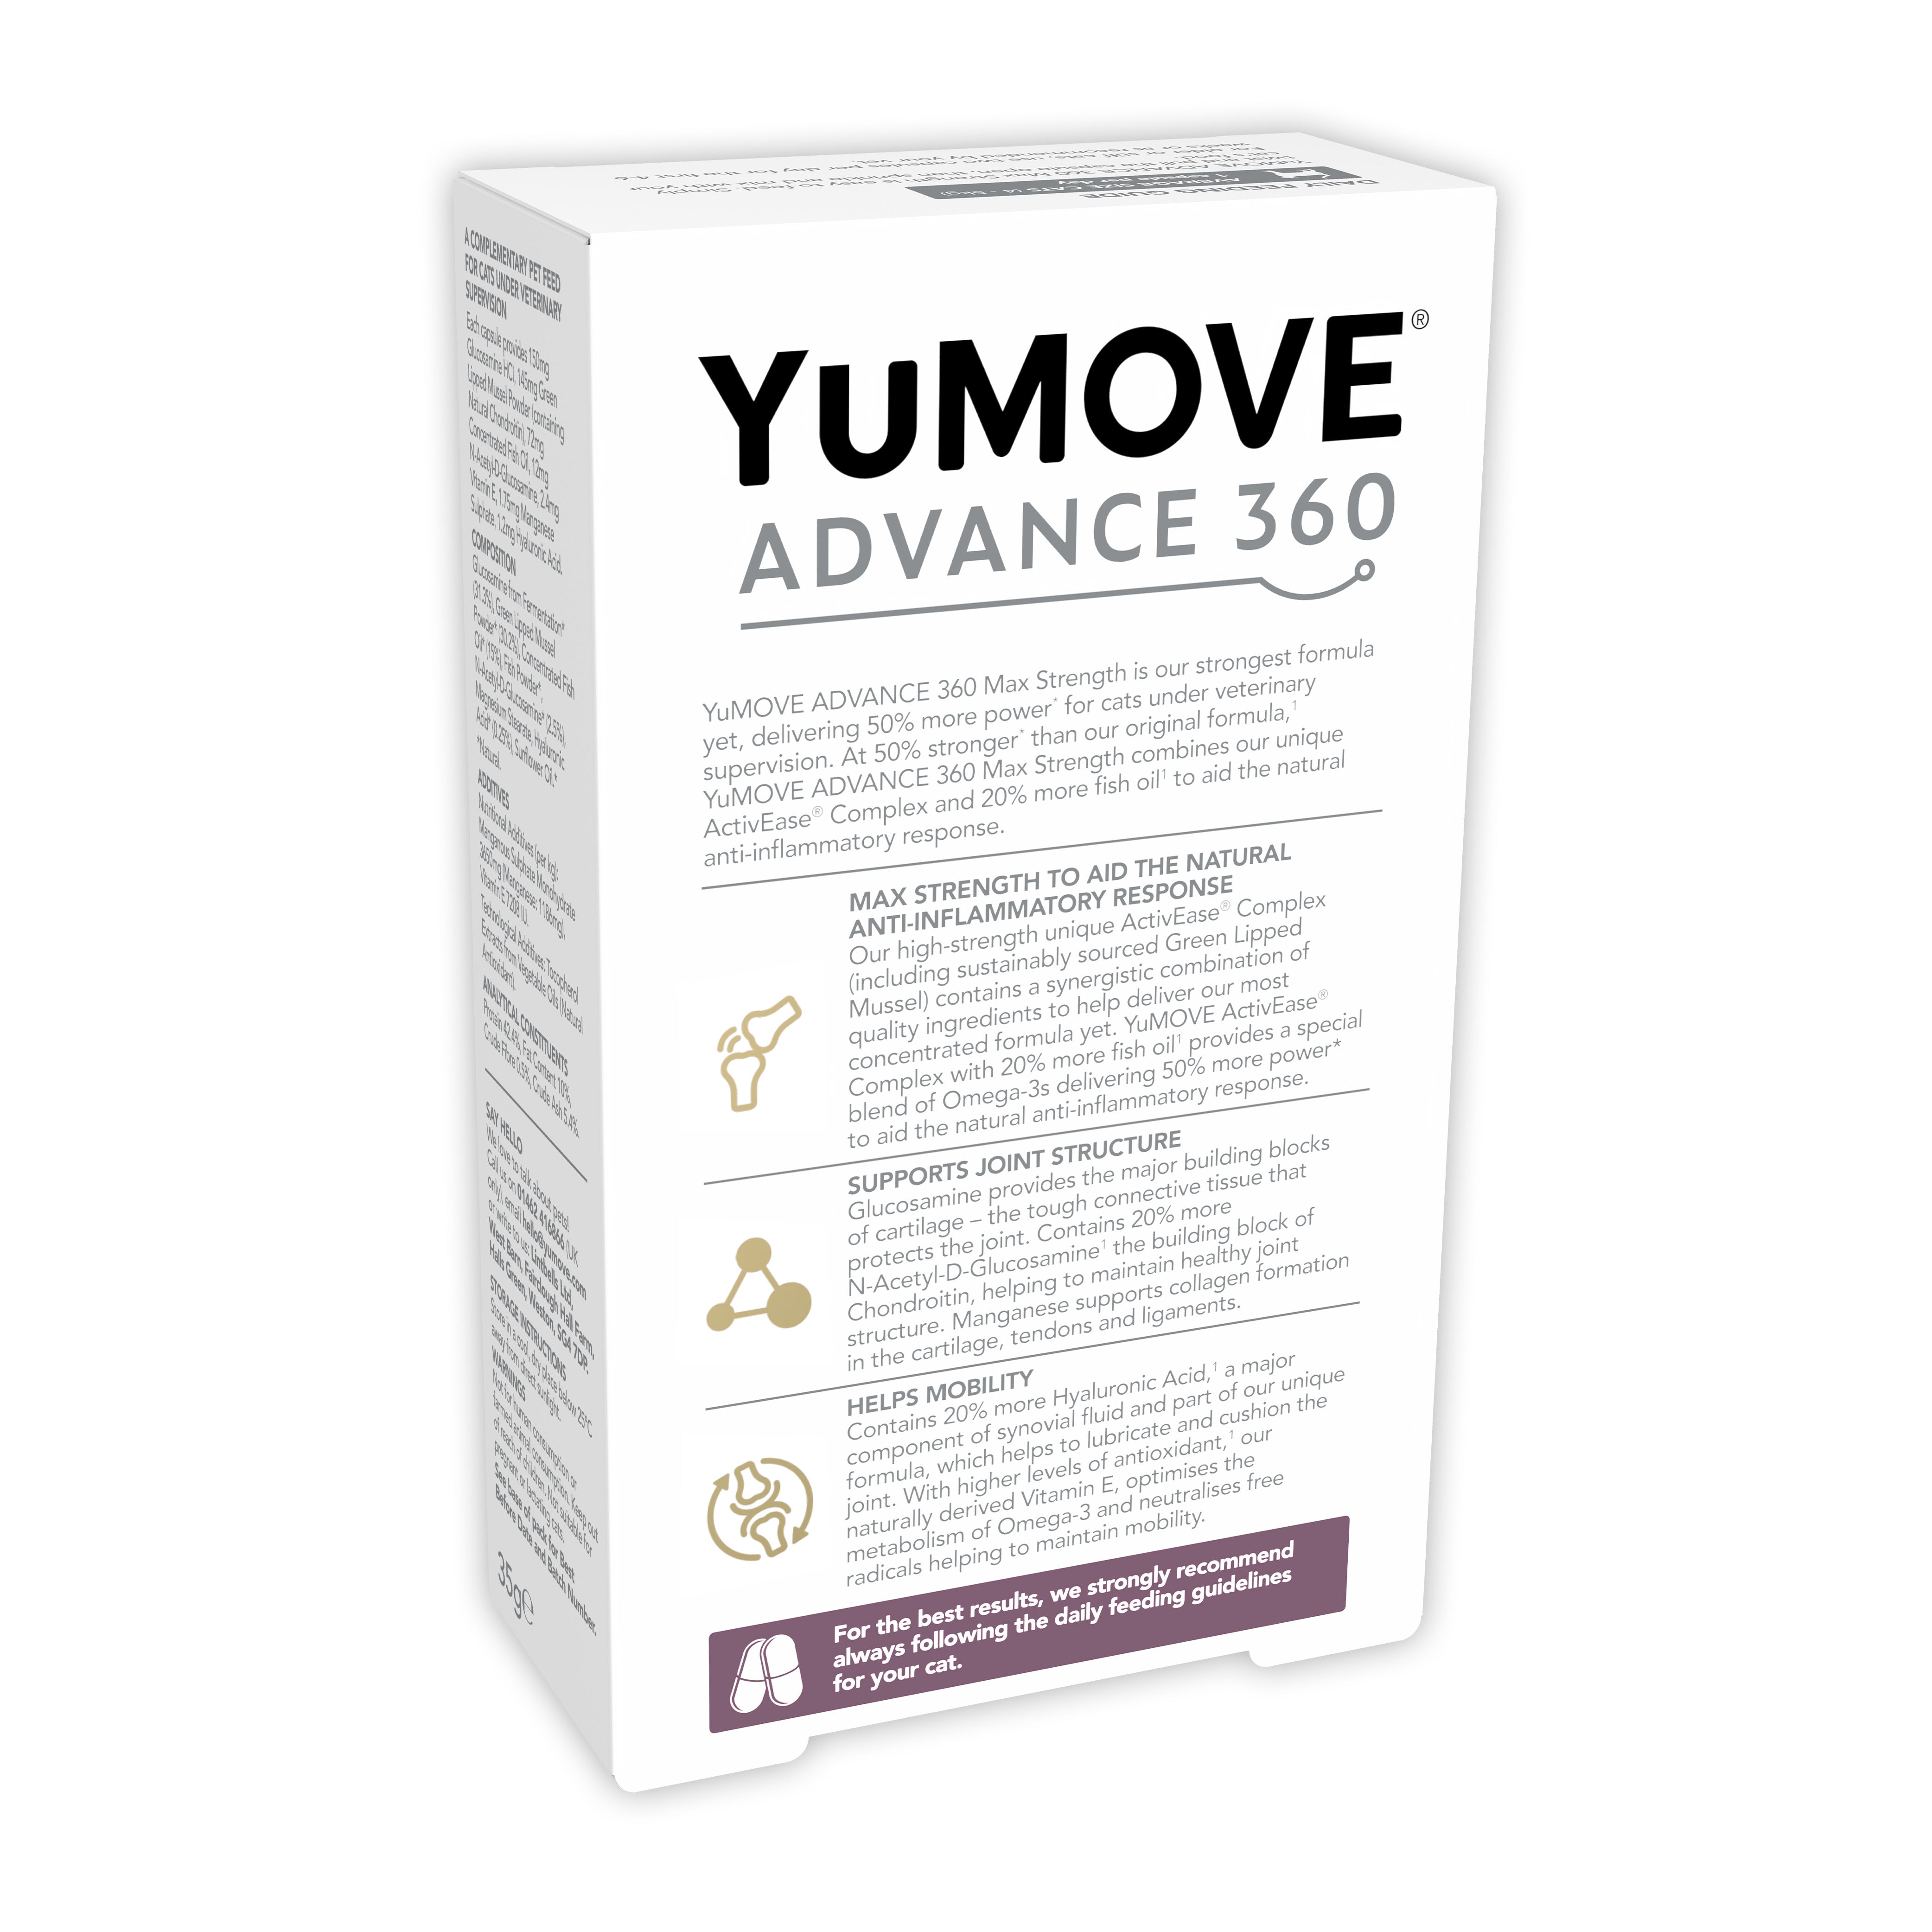 YuMOVE ADVANCE 360 Max Strength Joint Care for Cats